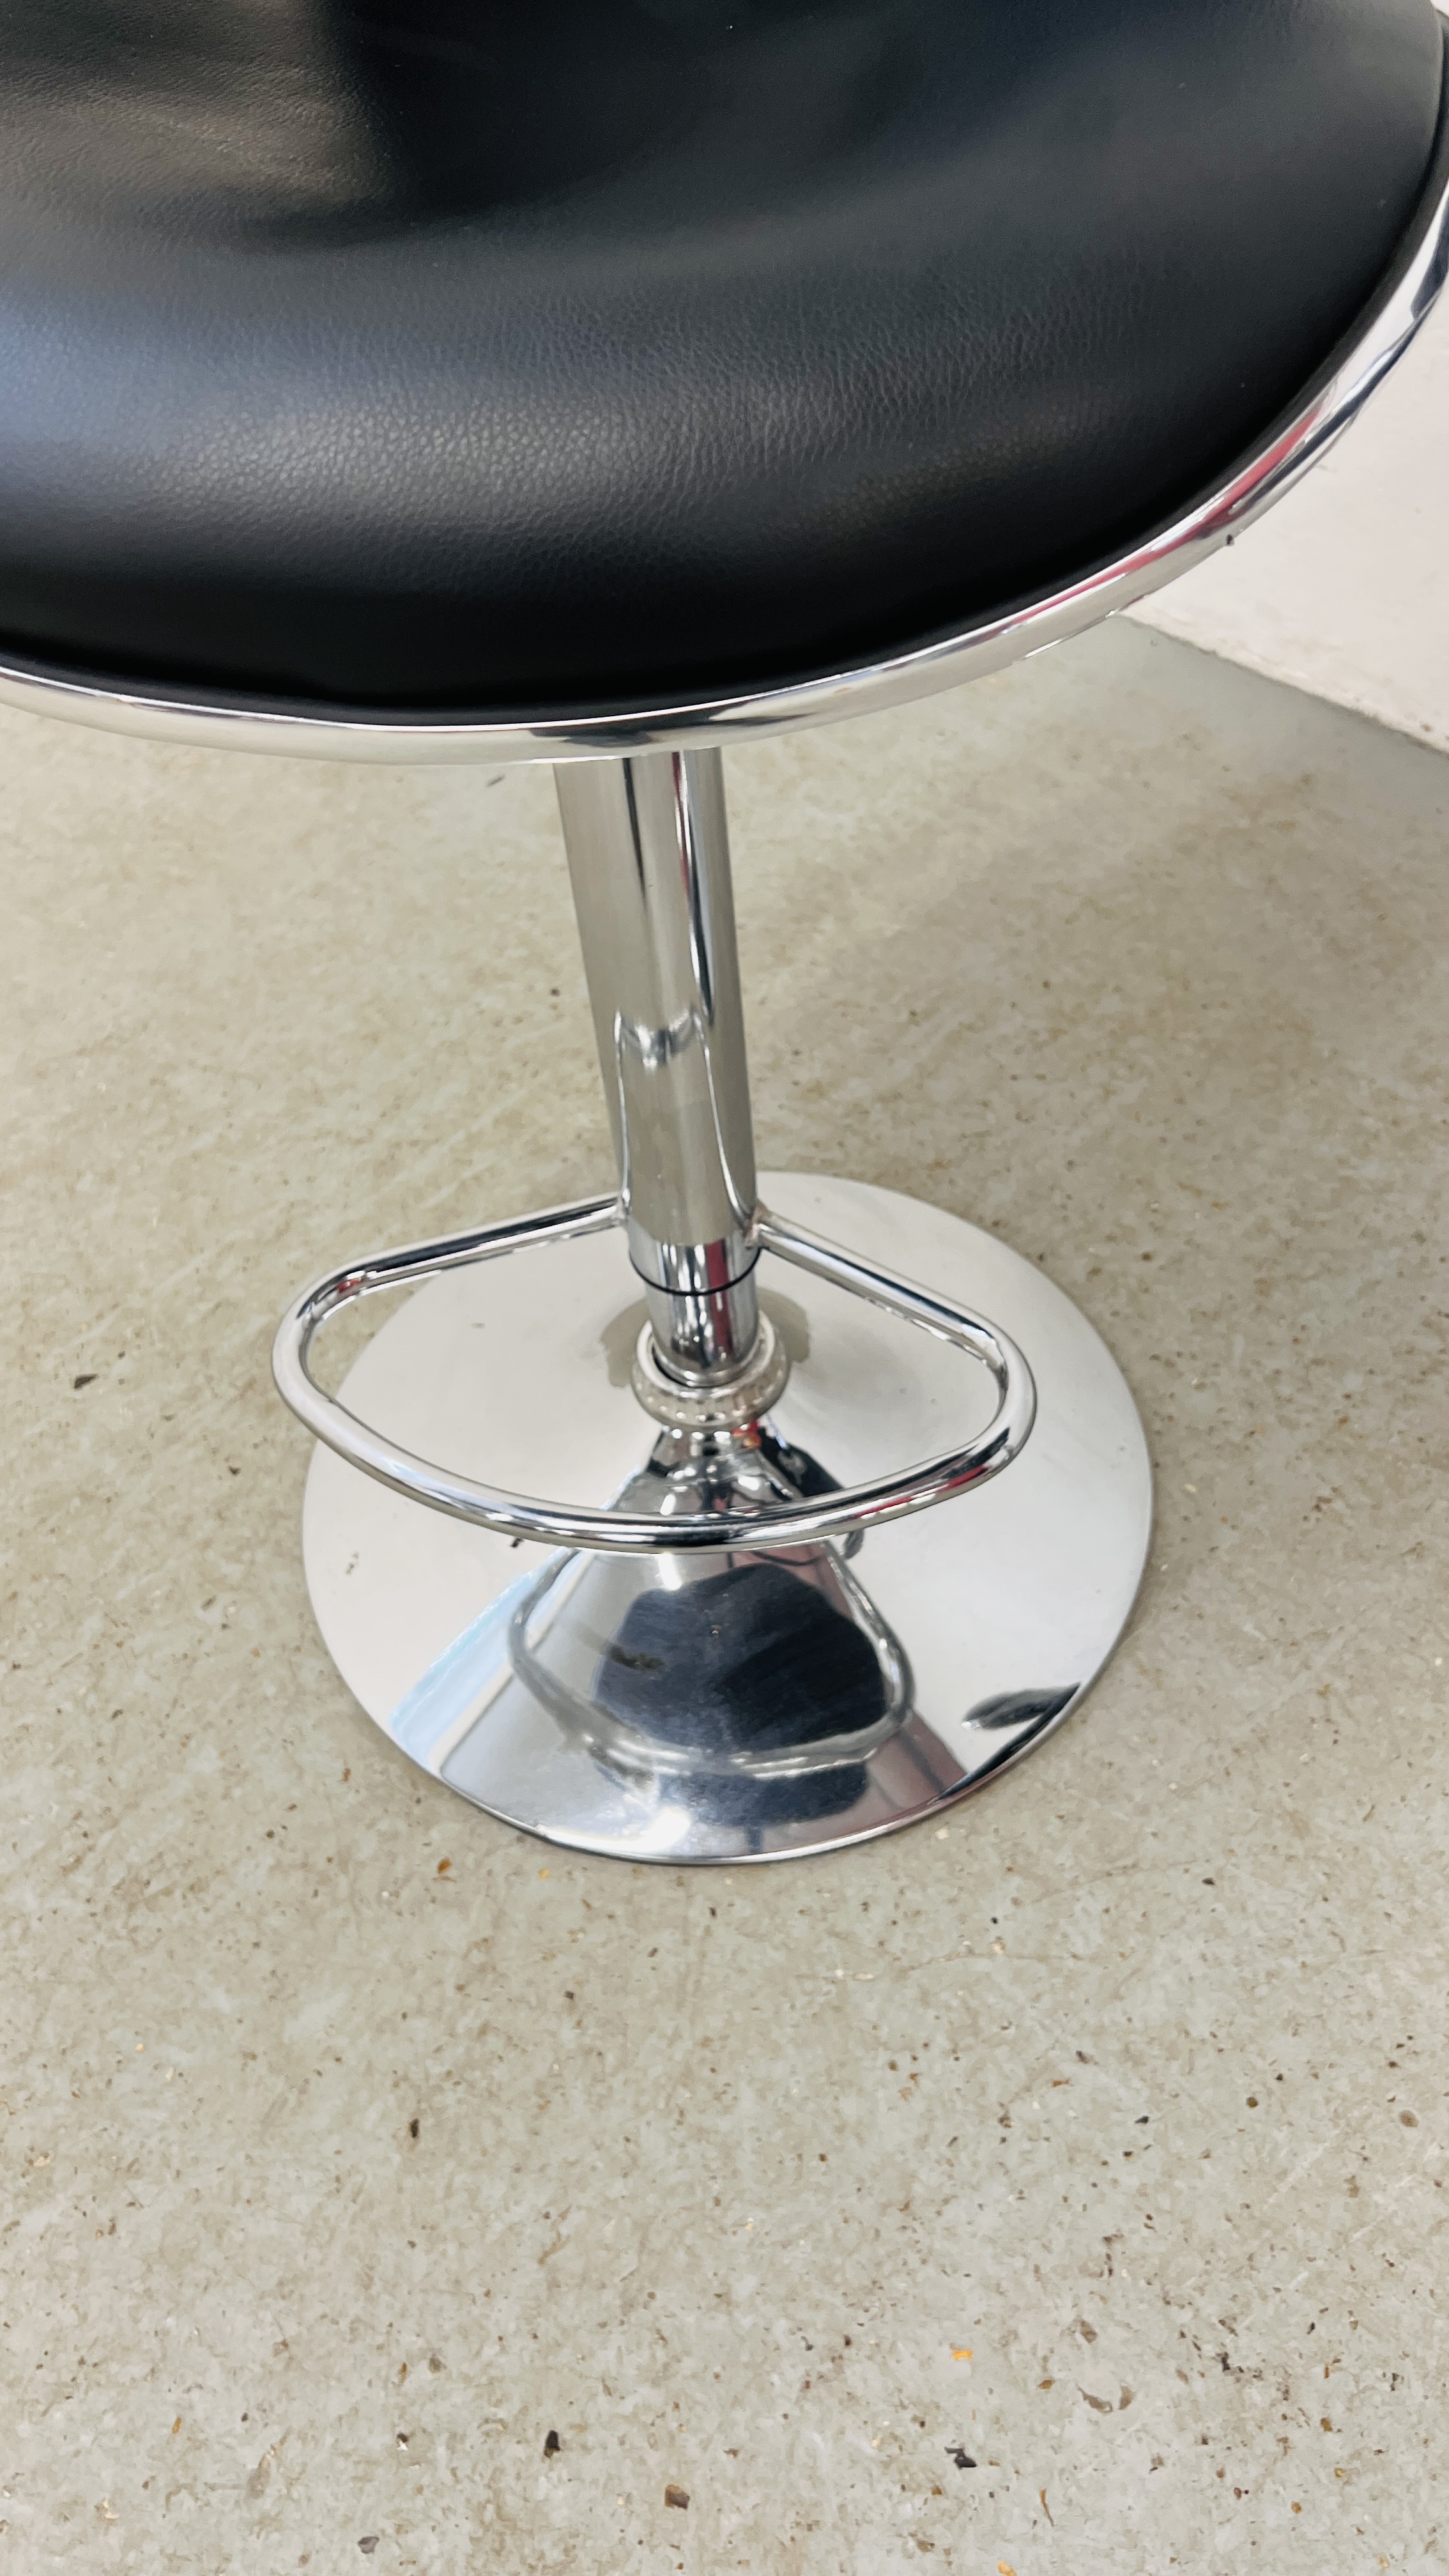 A PAIR OF CHROME FINISH RISE AND FALL BAR STOOLS - Image 6 of 9